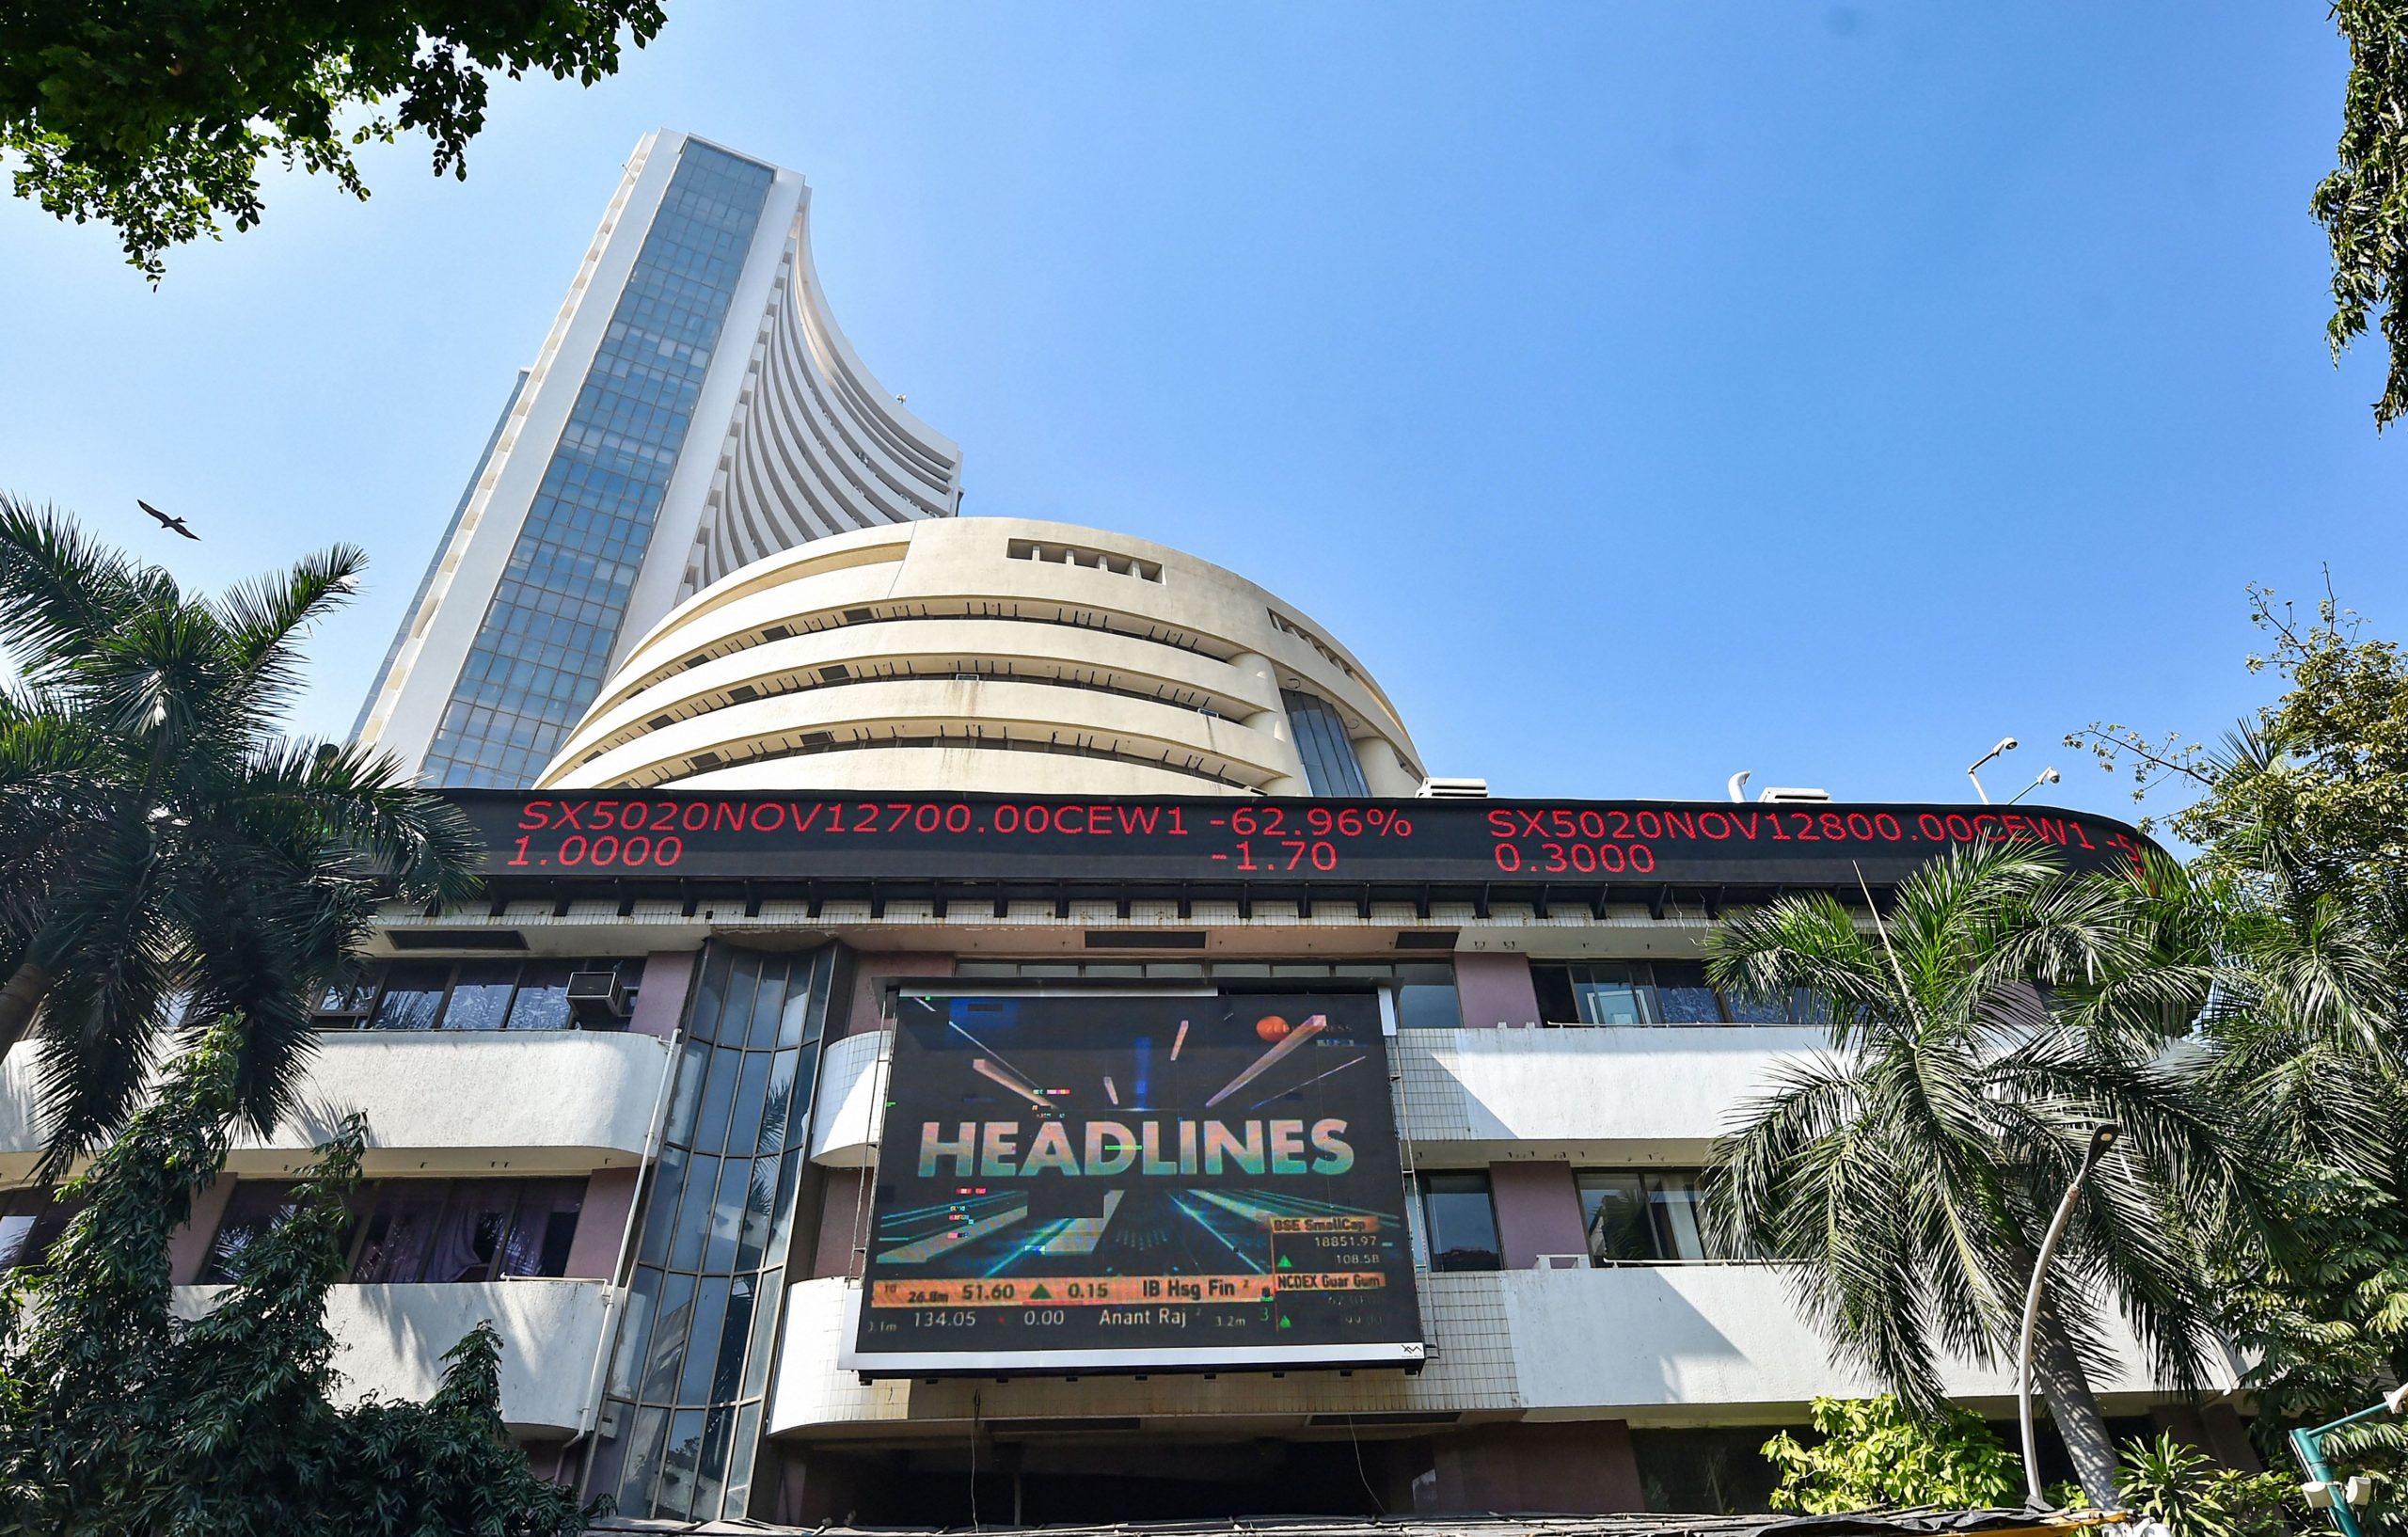 Trending Stocks: Tata Motors, AGTL, IOCL BPCL, HPCL, HCL and others in news today